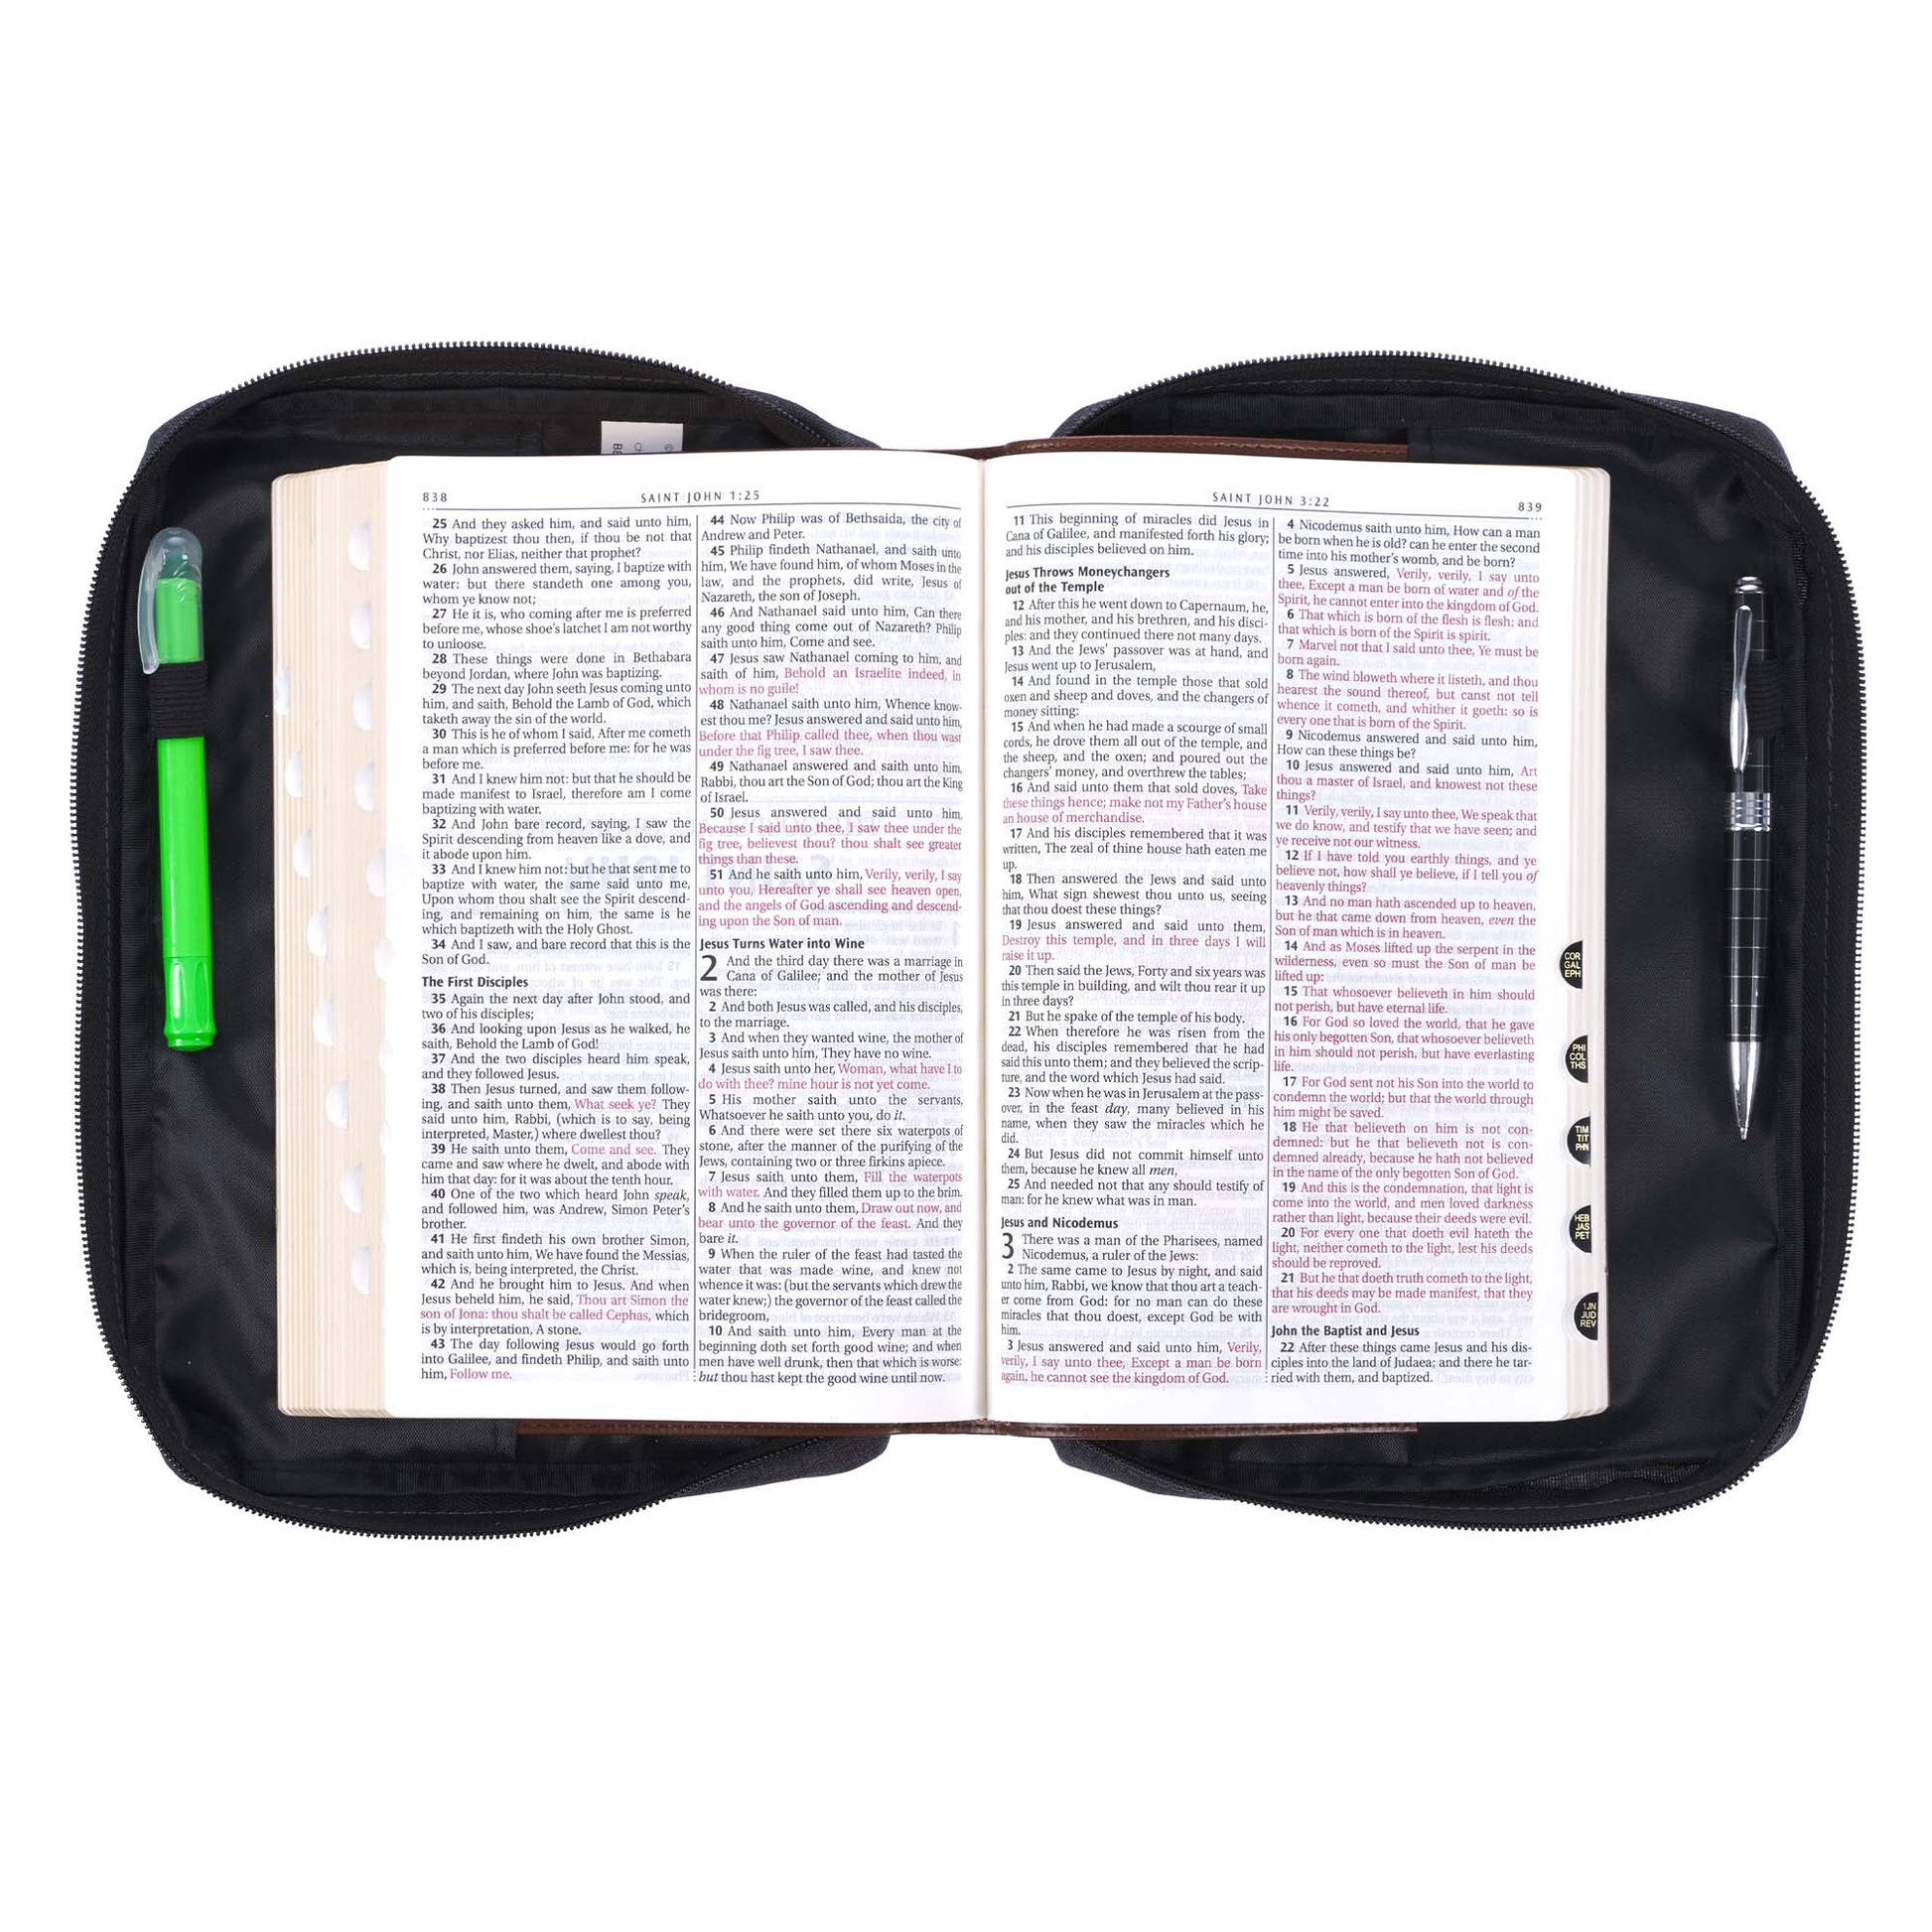 I Know the Plans Charcoal Value Bible Case - Jeremiah 29:11 - The Christian Gift Company